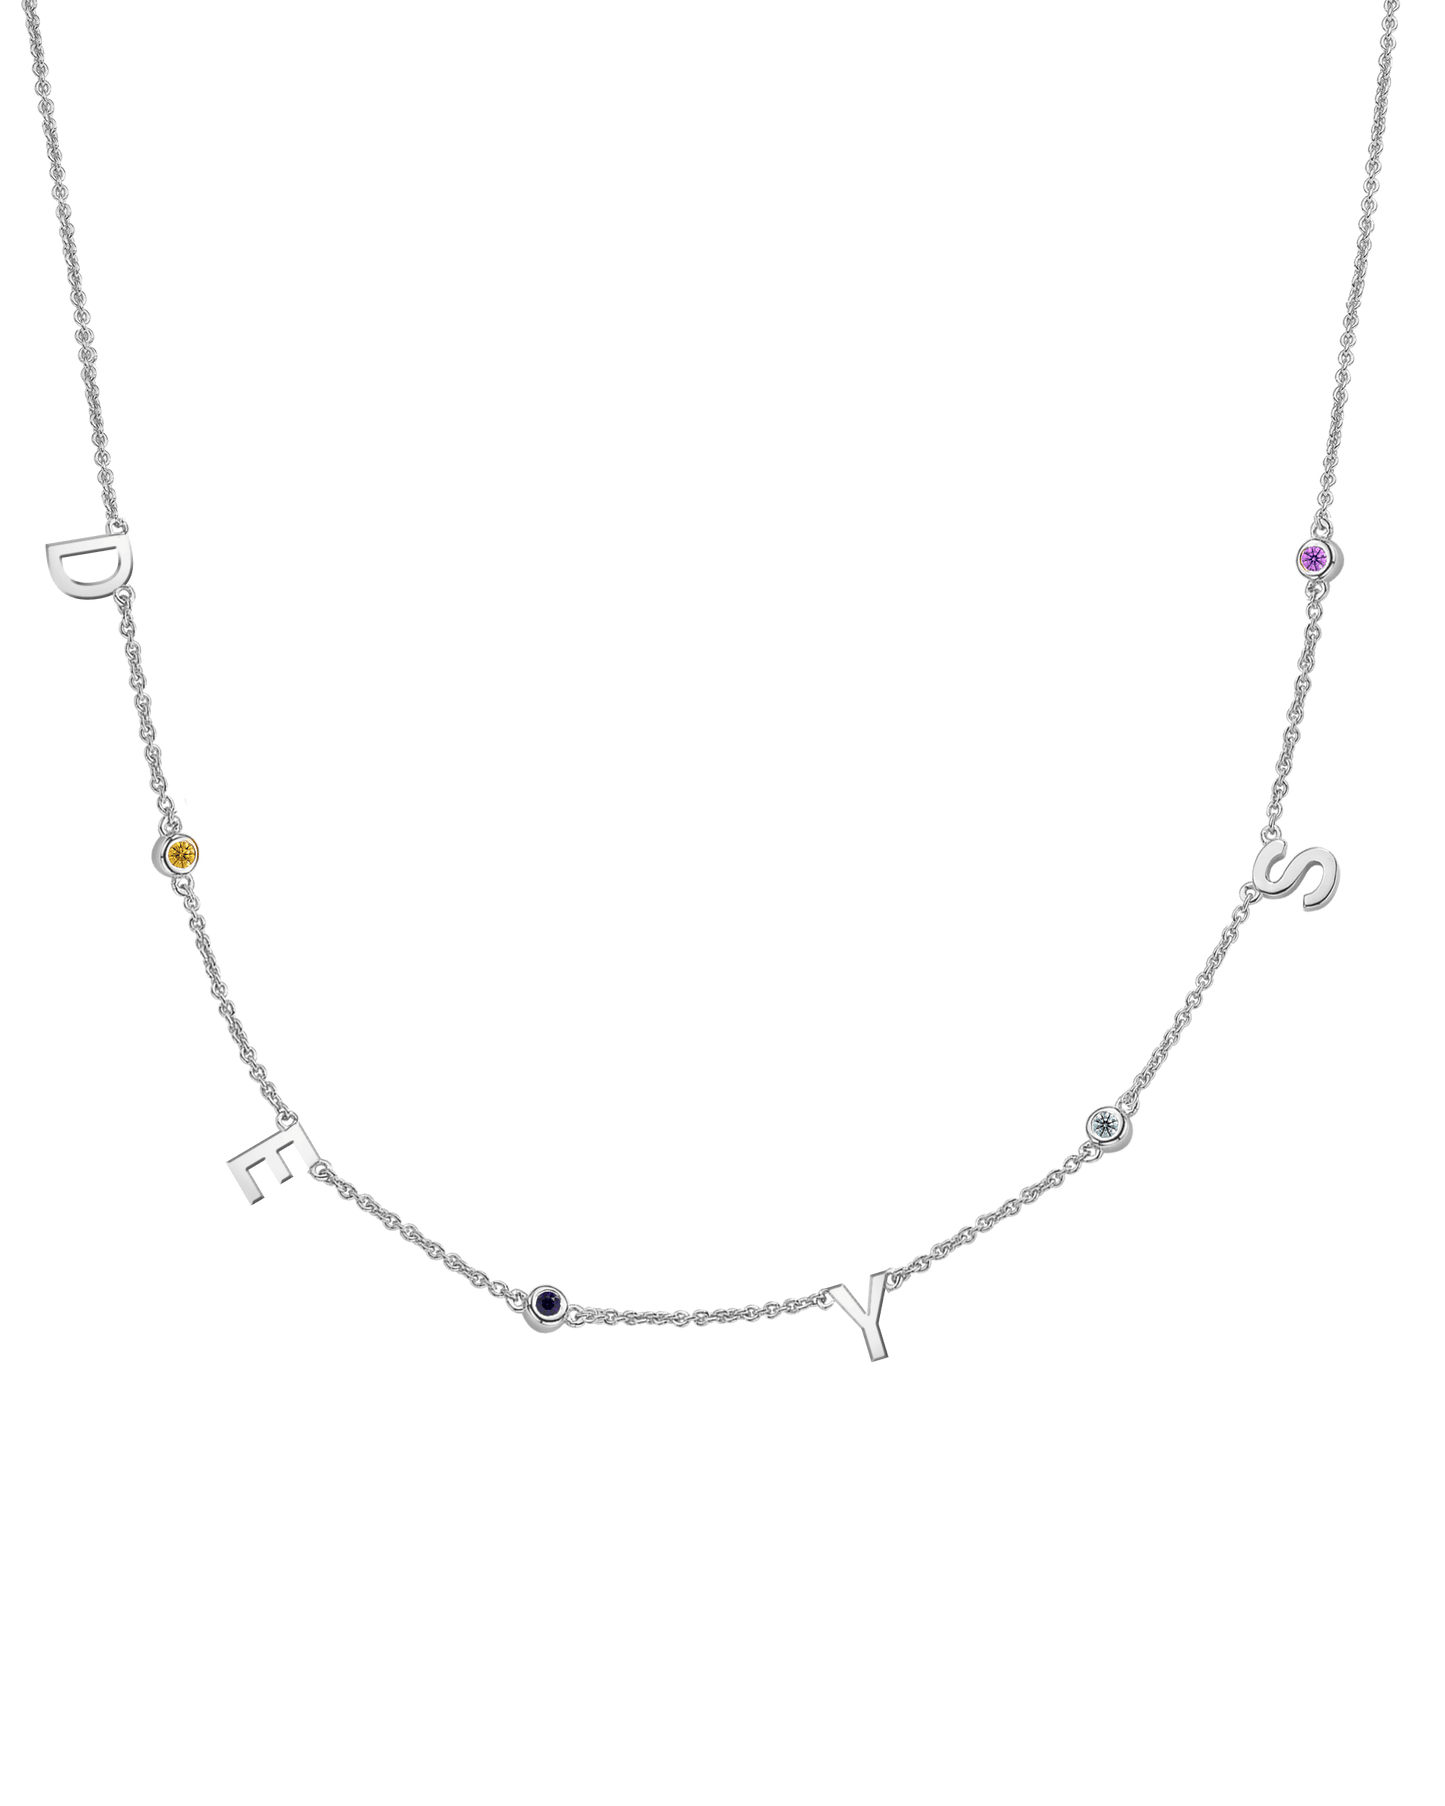 Initial Birthstone Necklace - 14K White Gold Necklaces magal-dev 4 Initials + 4 Birthstones Adjustable 16-17" (40cm-43cm) 